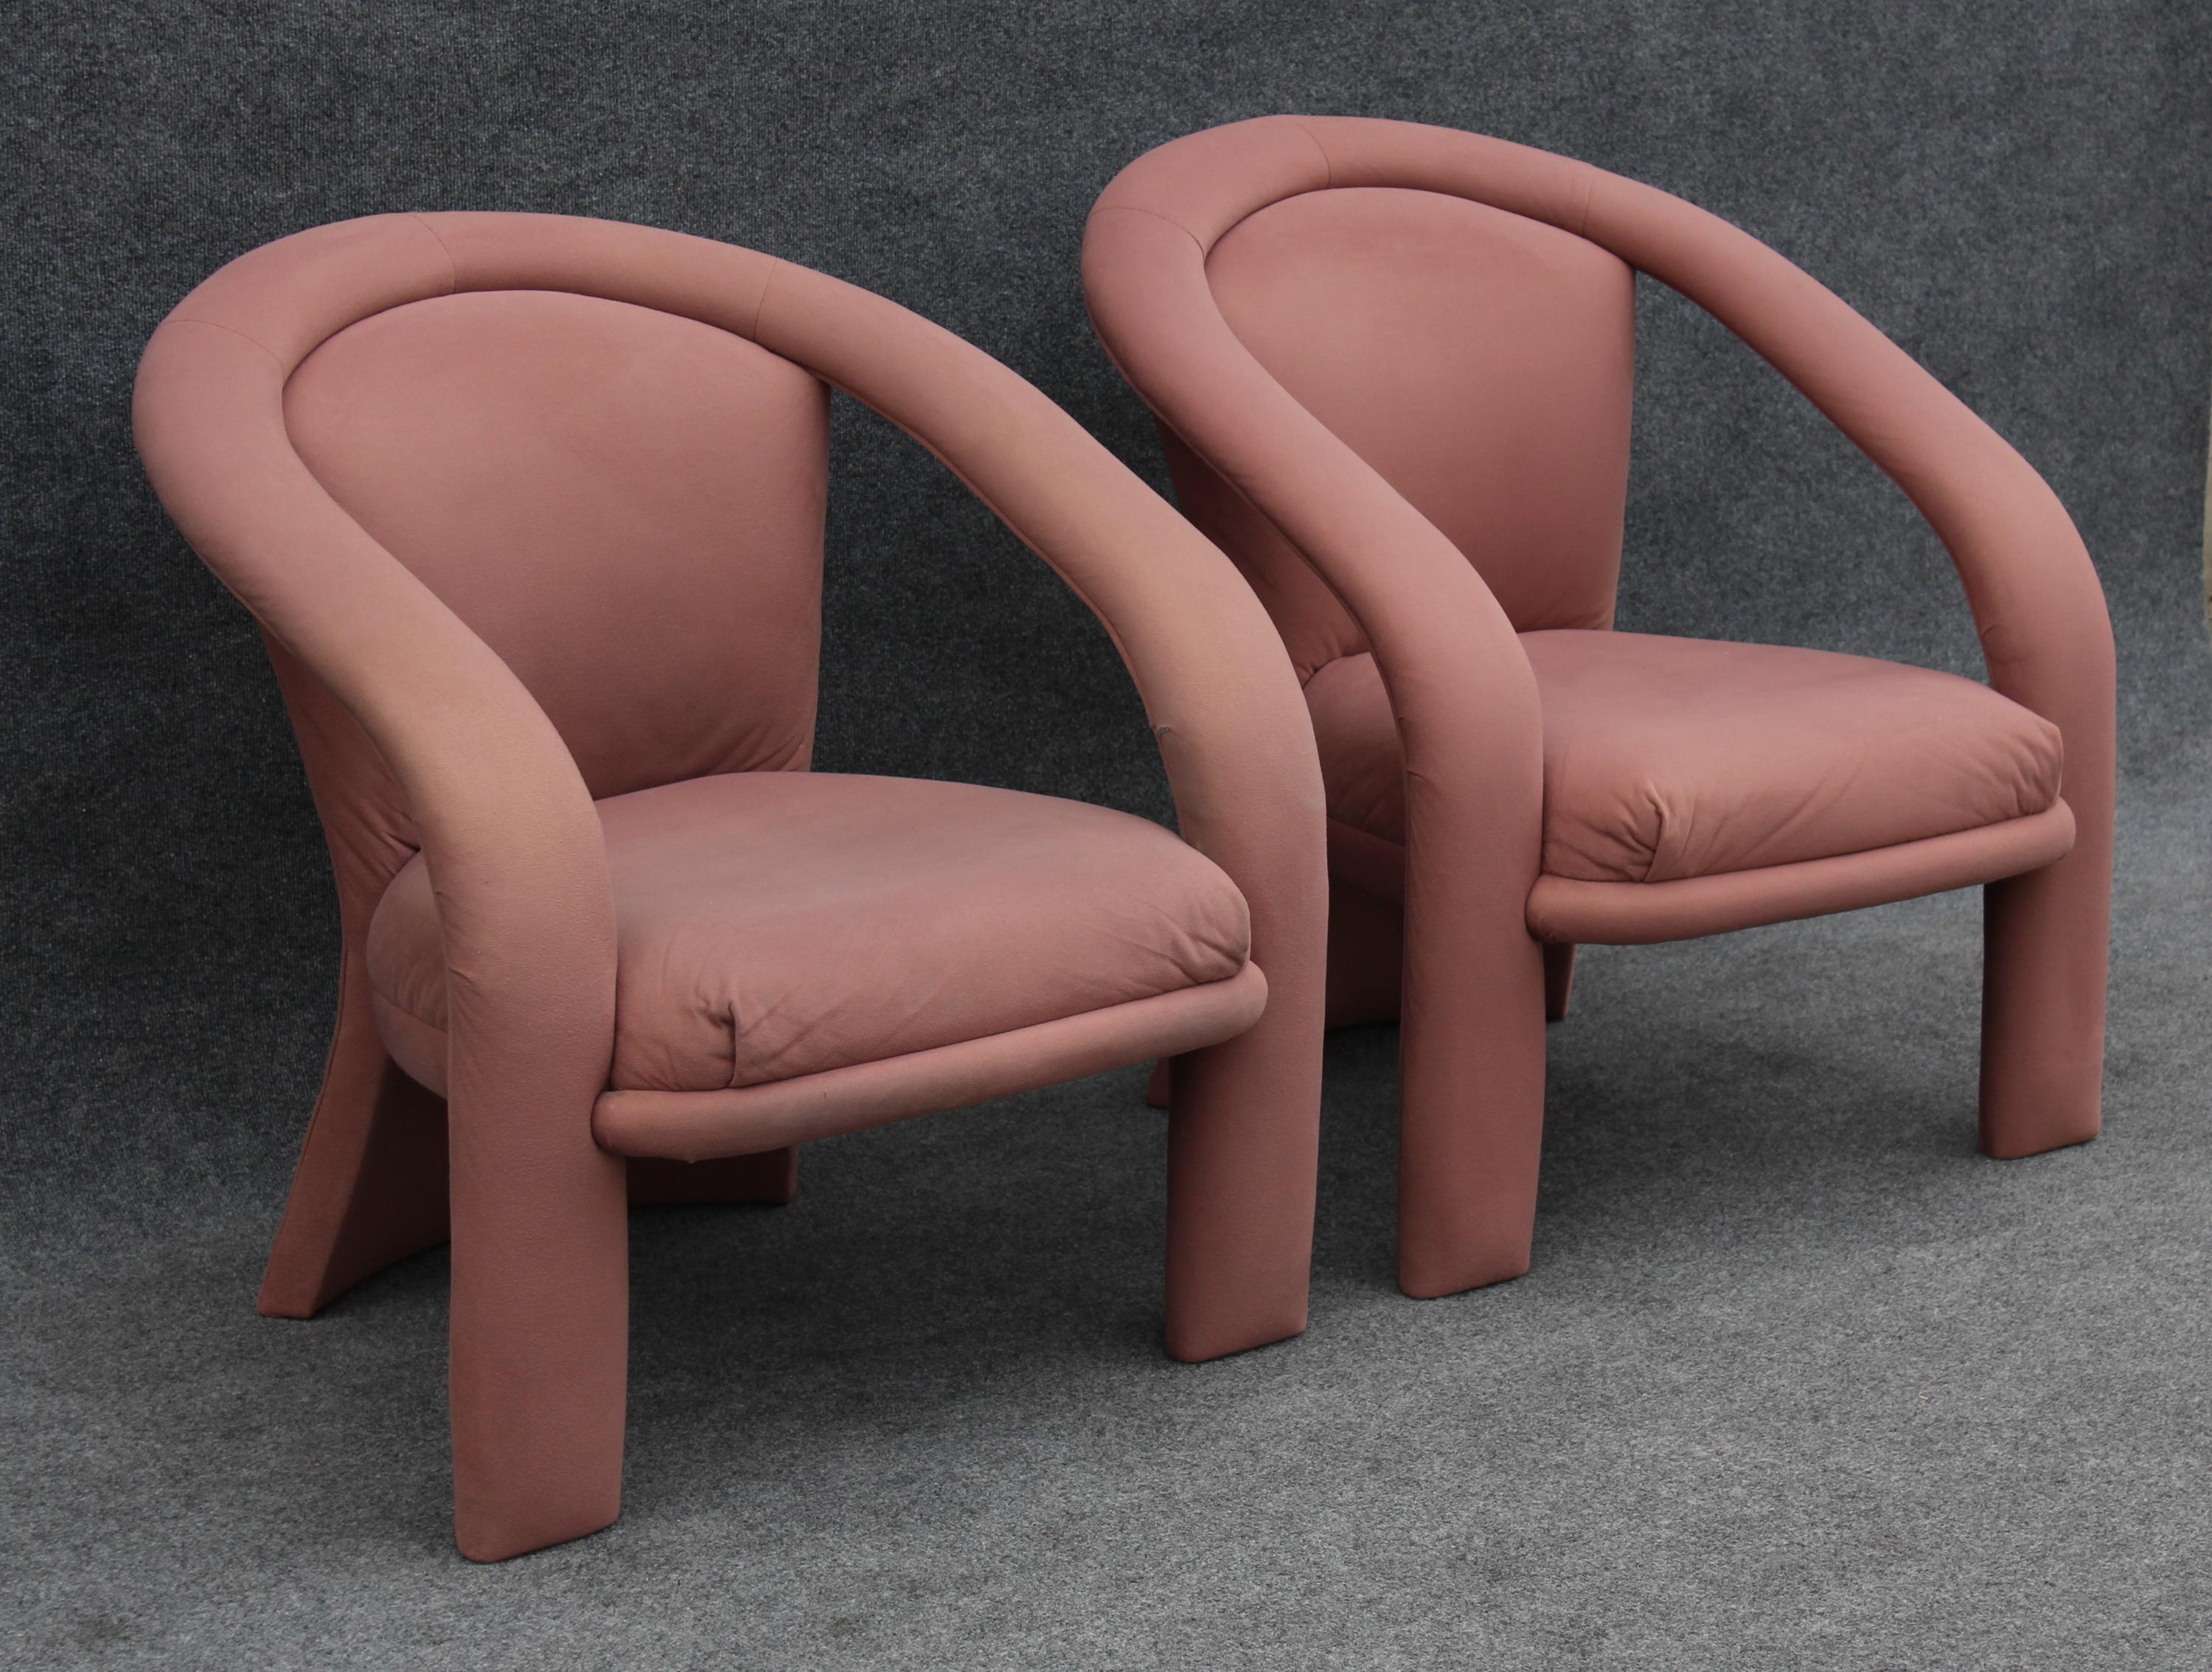 American Pair of Pink Suede Sculptural Ribbon Armchairs or Lounge Chairs by Marge Carson For Sale